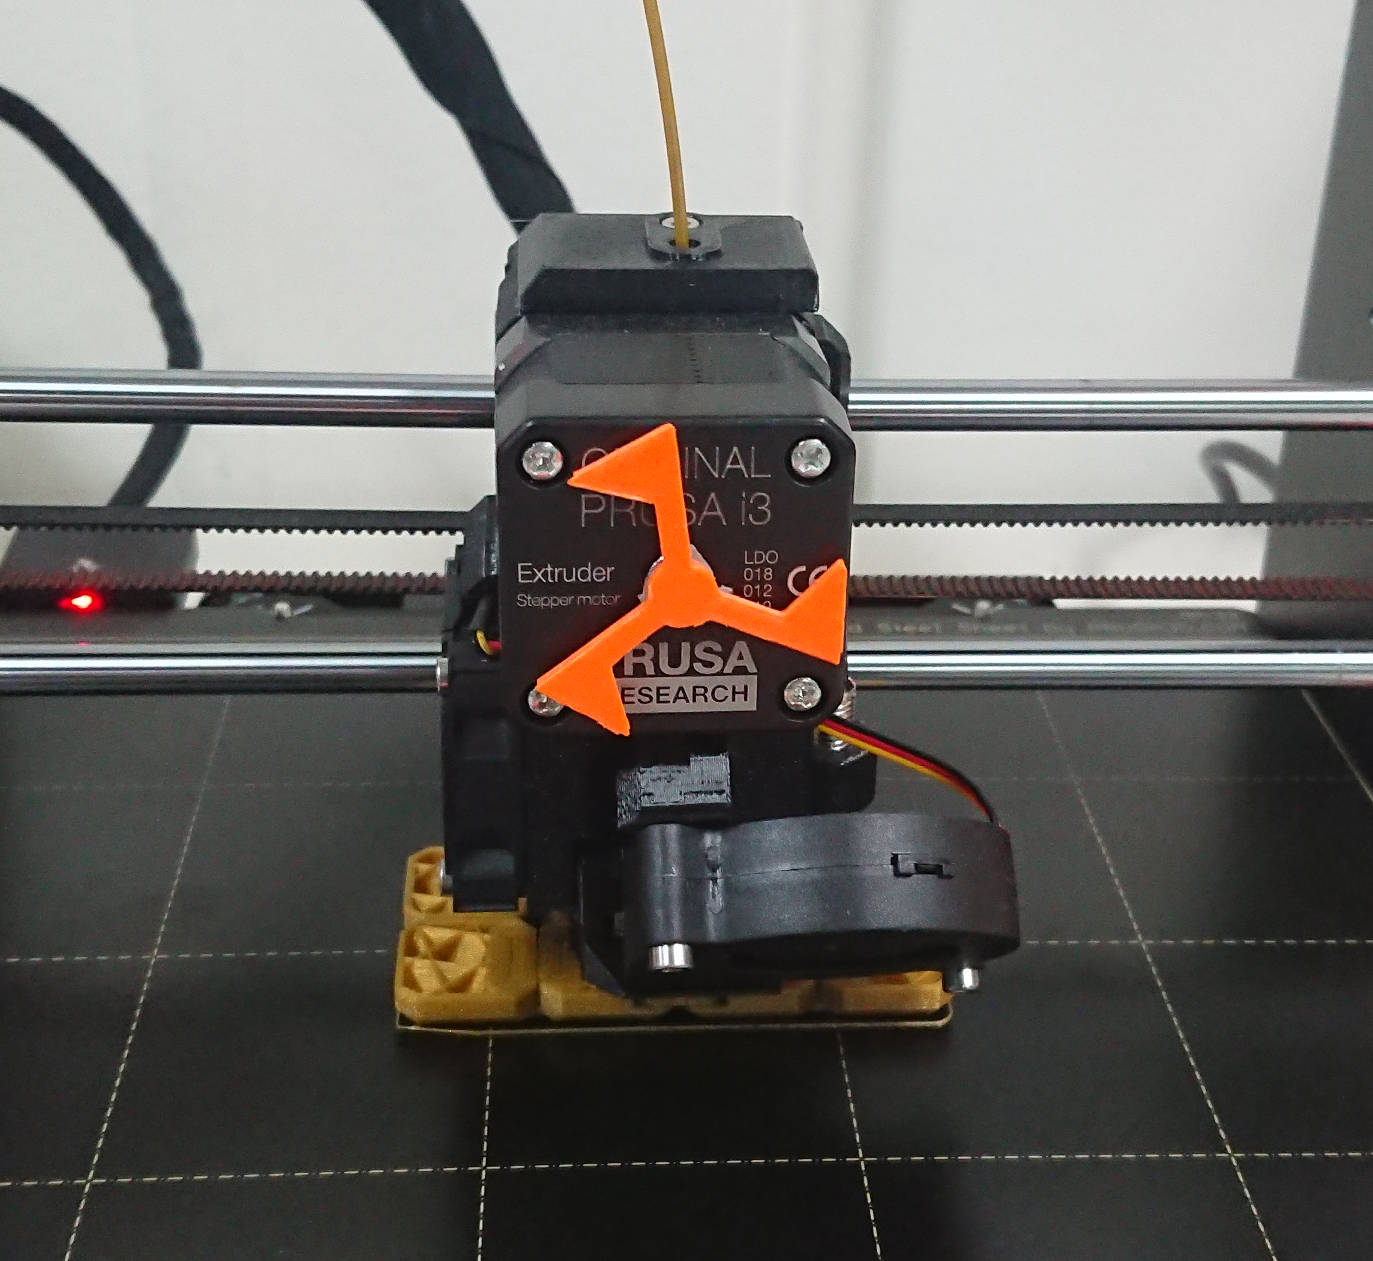 The triangle flag on the Prusa extruder motor